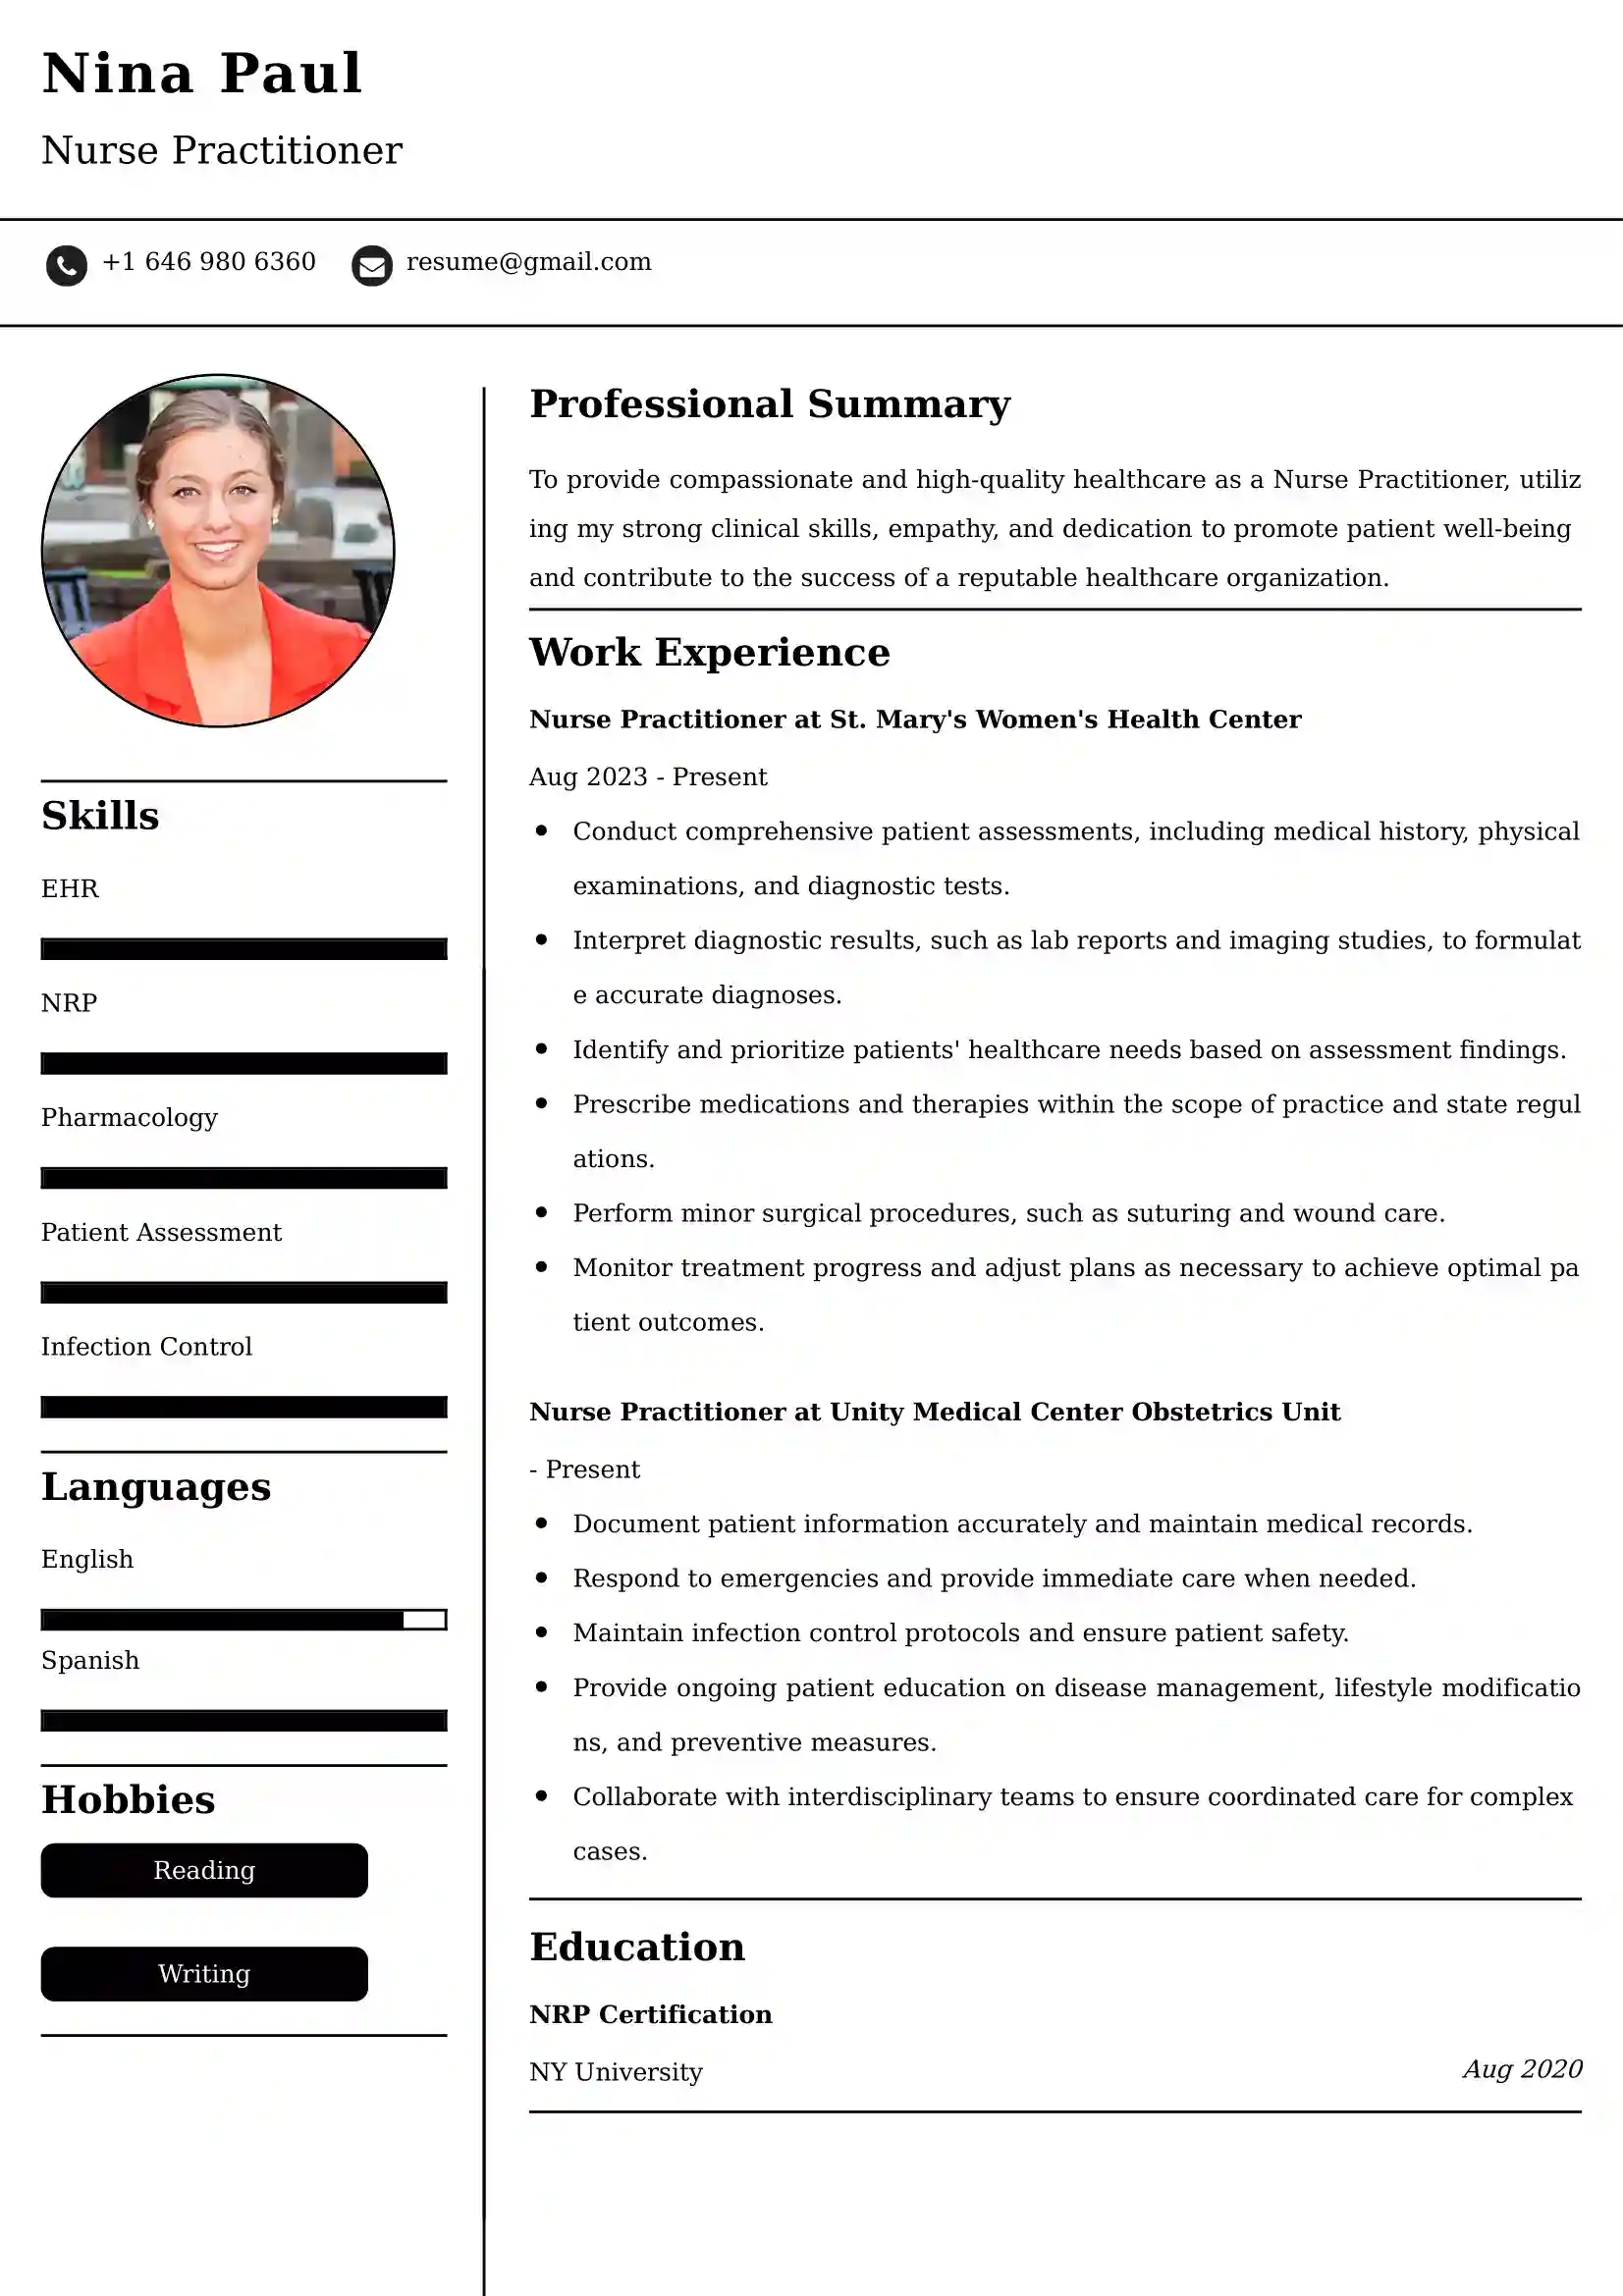 Nurse Practitioner Resume Examples - Australian Format and Tips